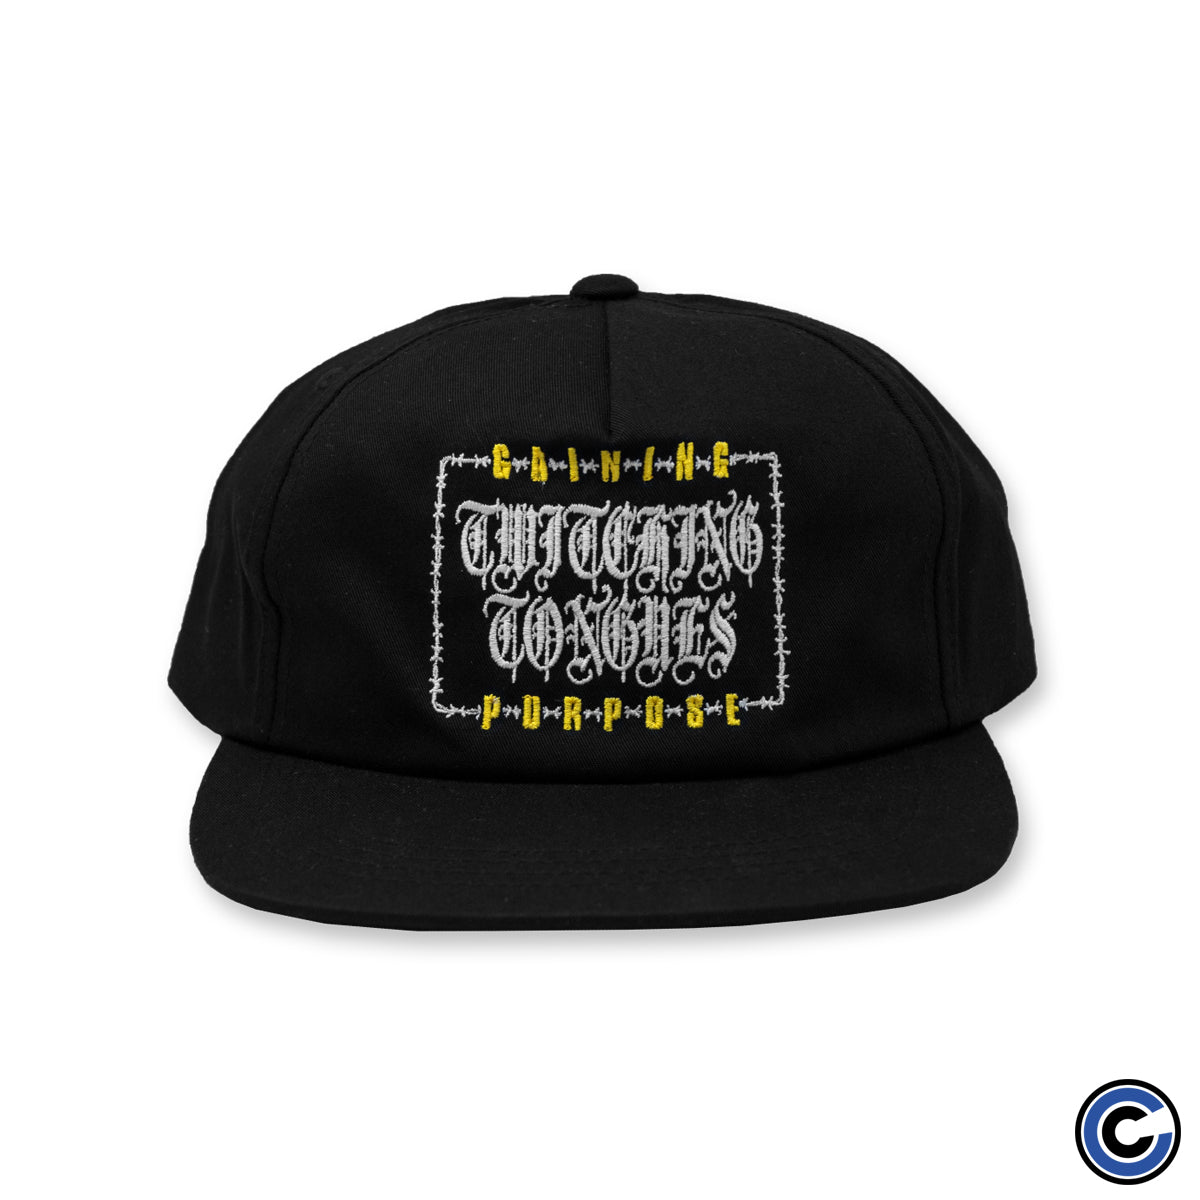 Twitching Tongues "Barbed Wire" Black Snapback